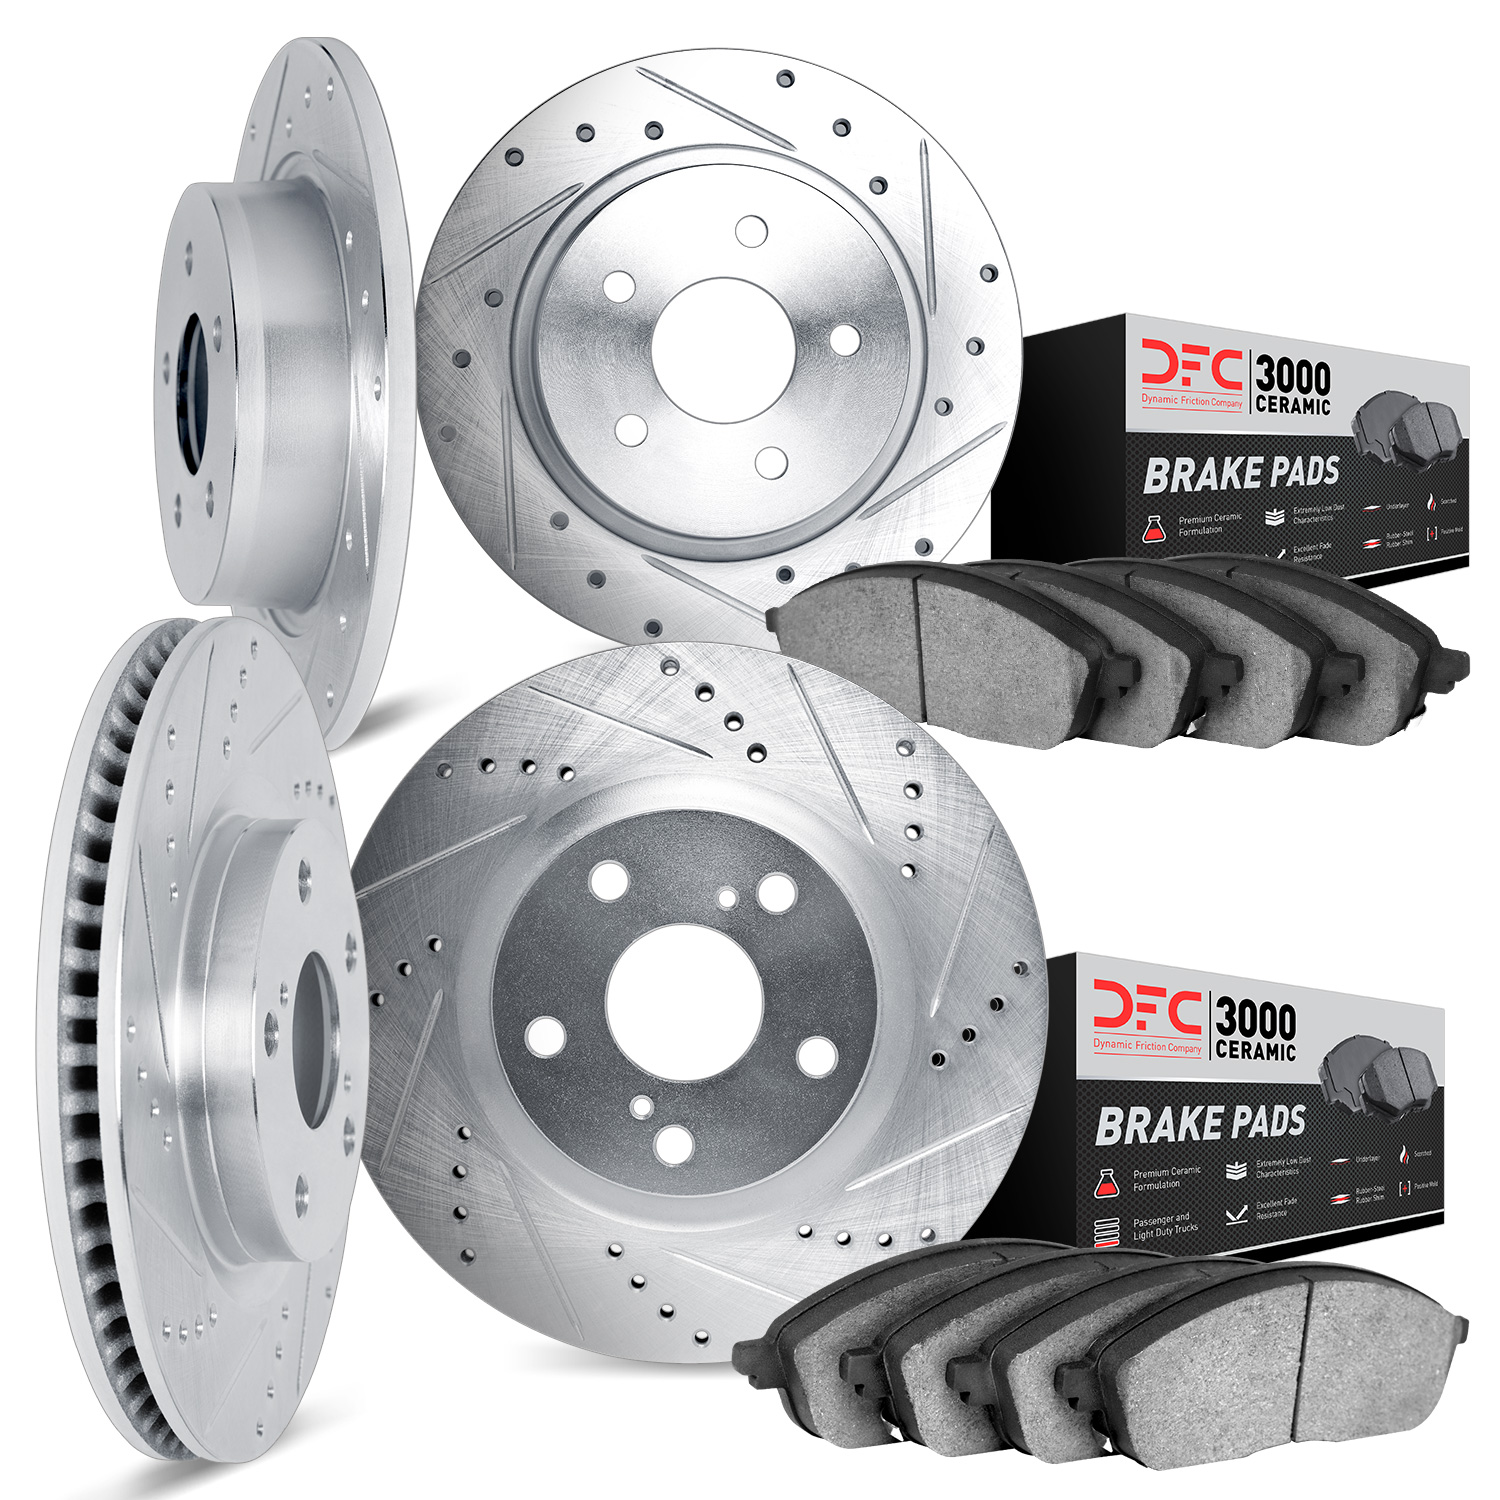 7304-54116 Drilled/Slotted Brake Rotor with 3000-Series Ceramic Brake Pads Kit [Silver], 2015-2019 Ford/Lincoln/Mercury/Mazda, P